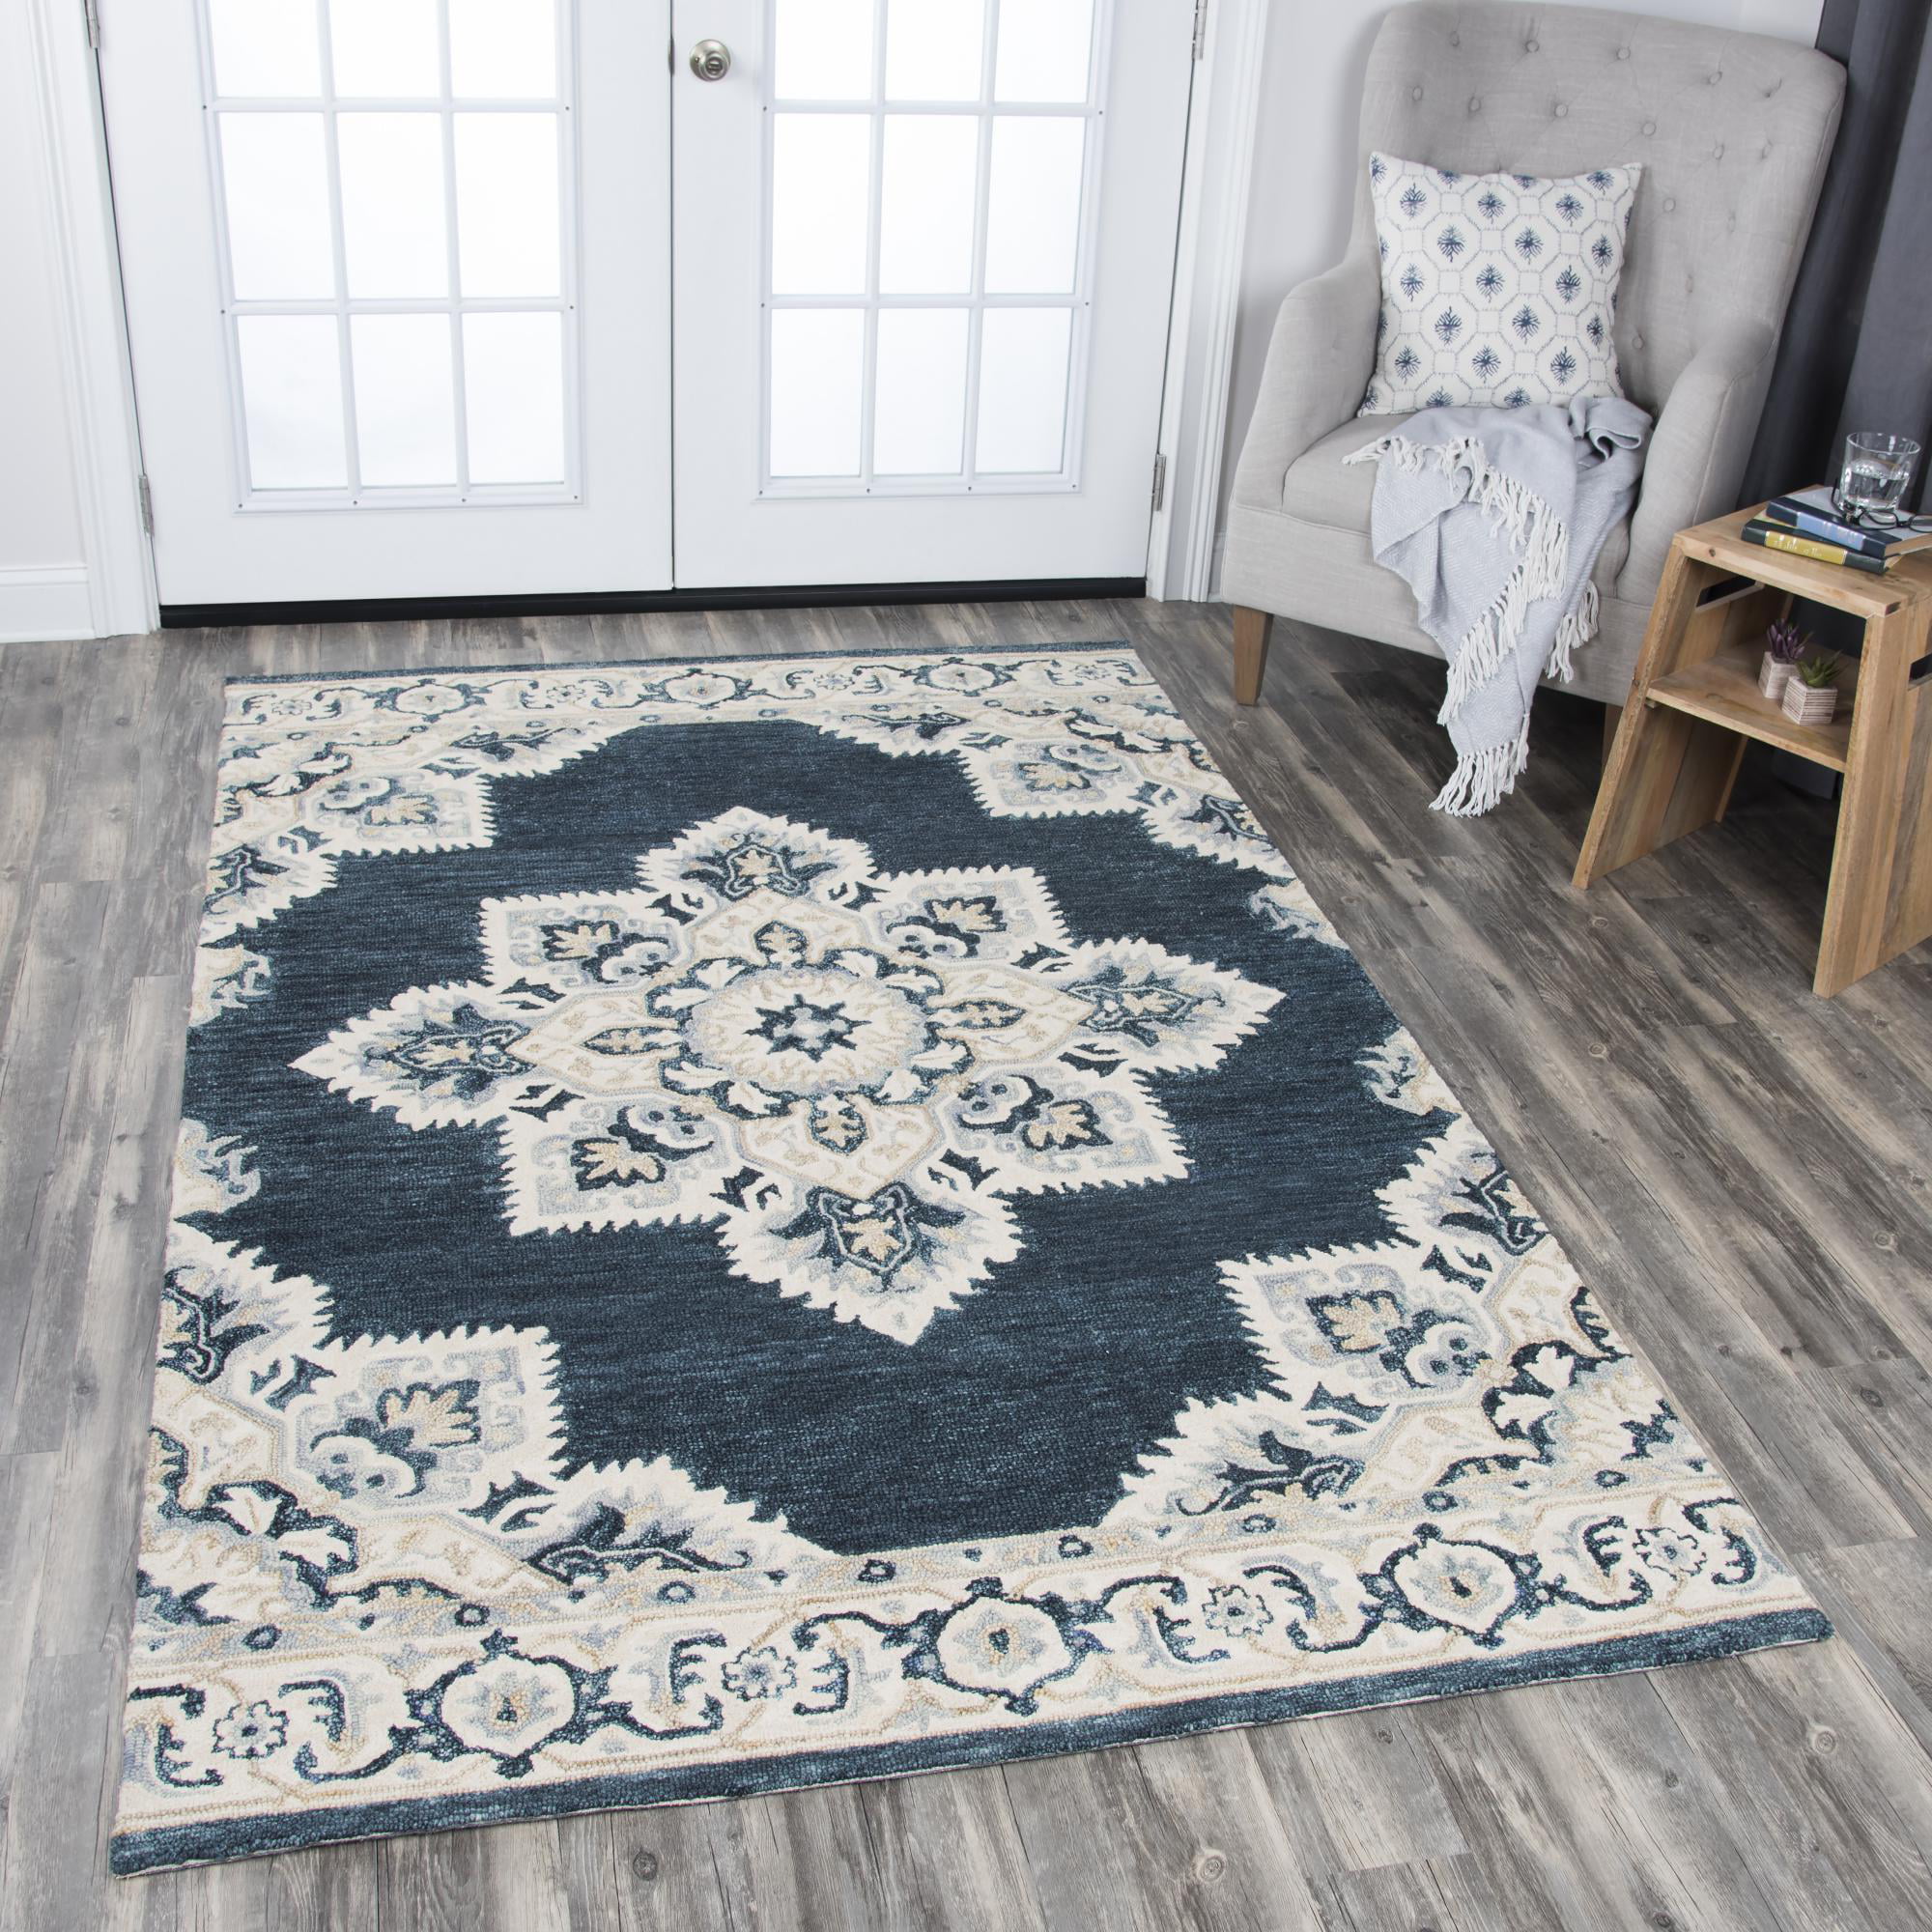 Rizzy Home Charming 3' x 5' Floral Ivory/Gray/Rust/Blue Hand-Tufted Area Rug 